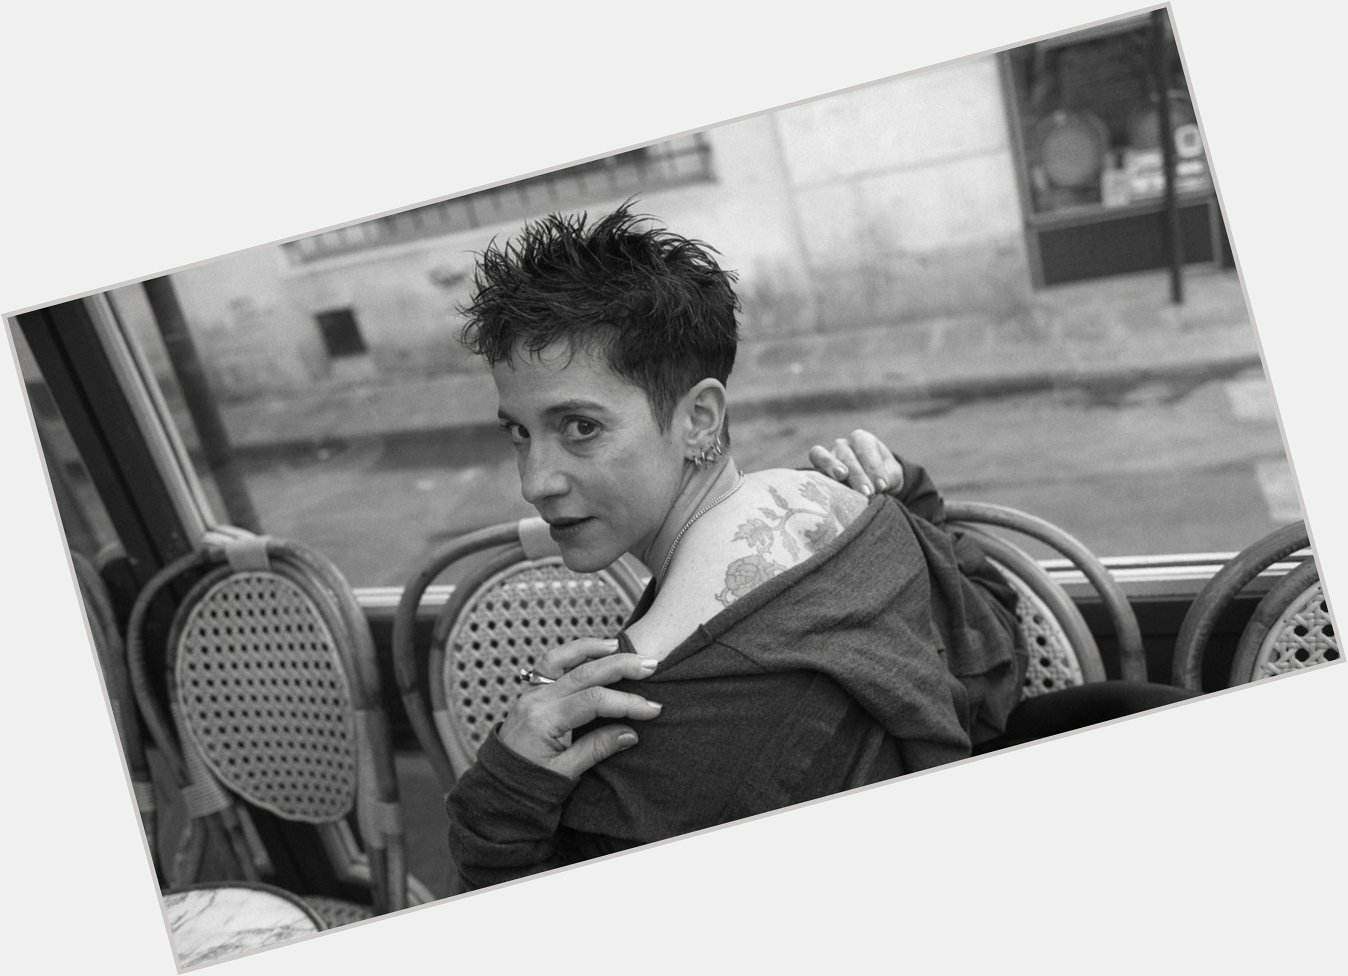 Happy birthday to one of my biggest influences - Kathy Acker. 

I\ll thread nice things below. 